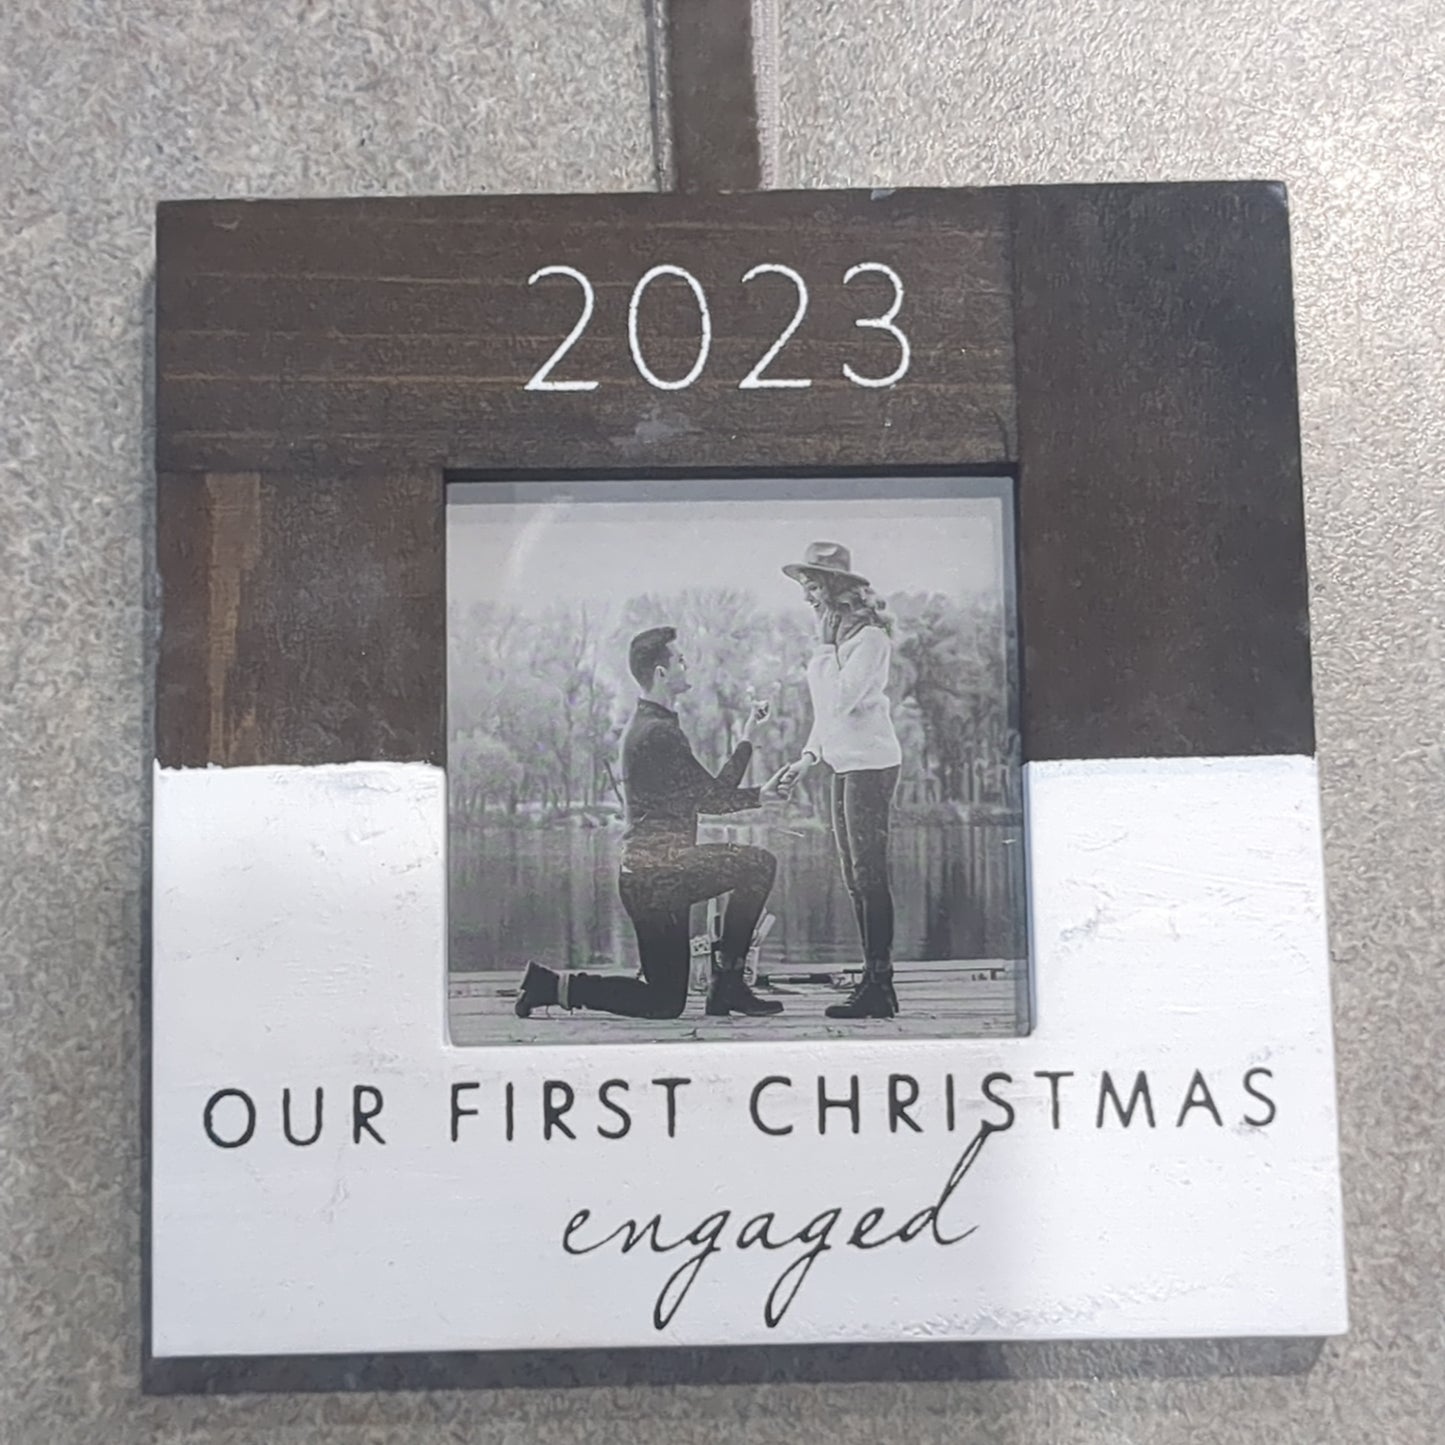 2023 our first Christmas engaged photo frame